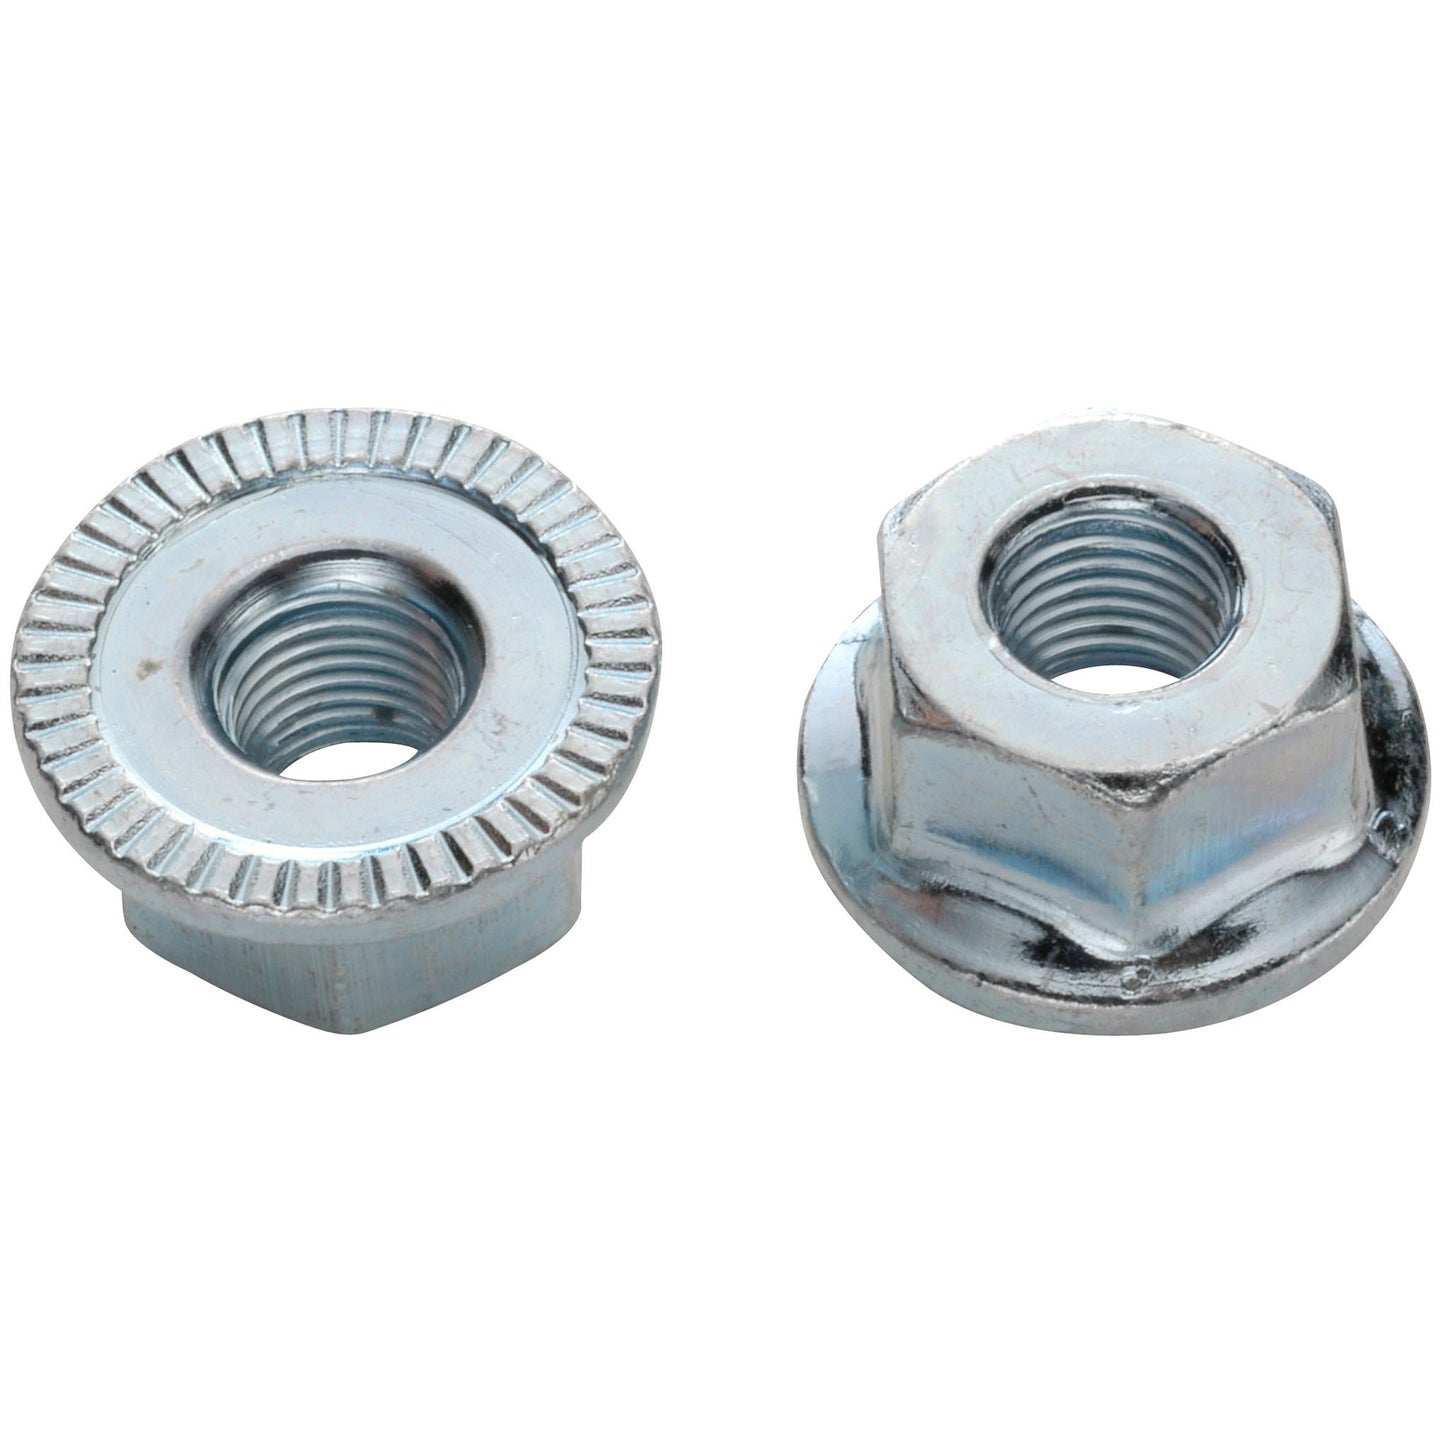 Flange nuts for circuits FG 7.9 galvanized steel